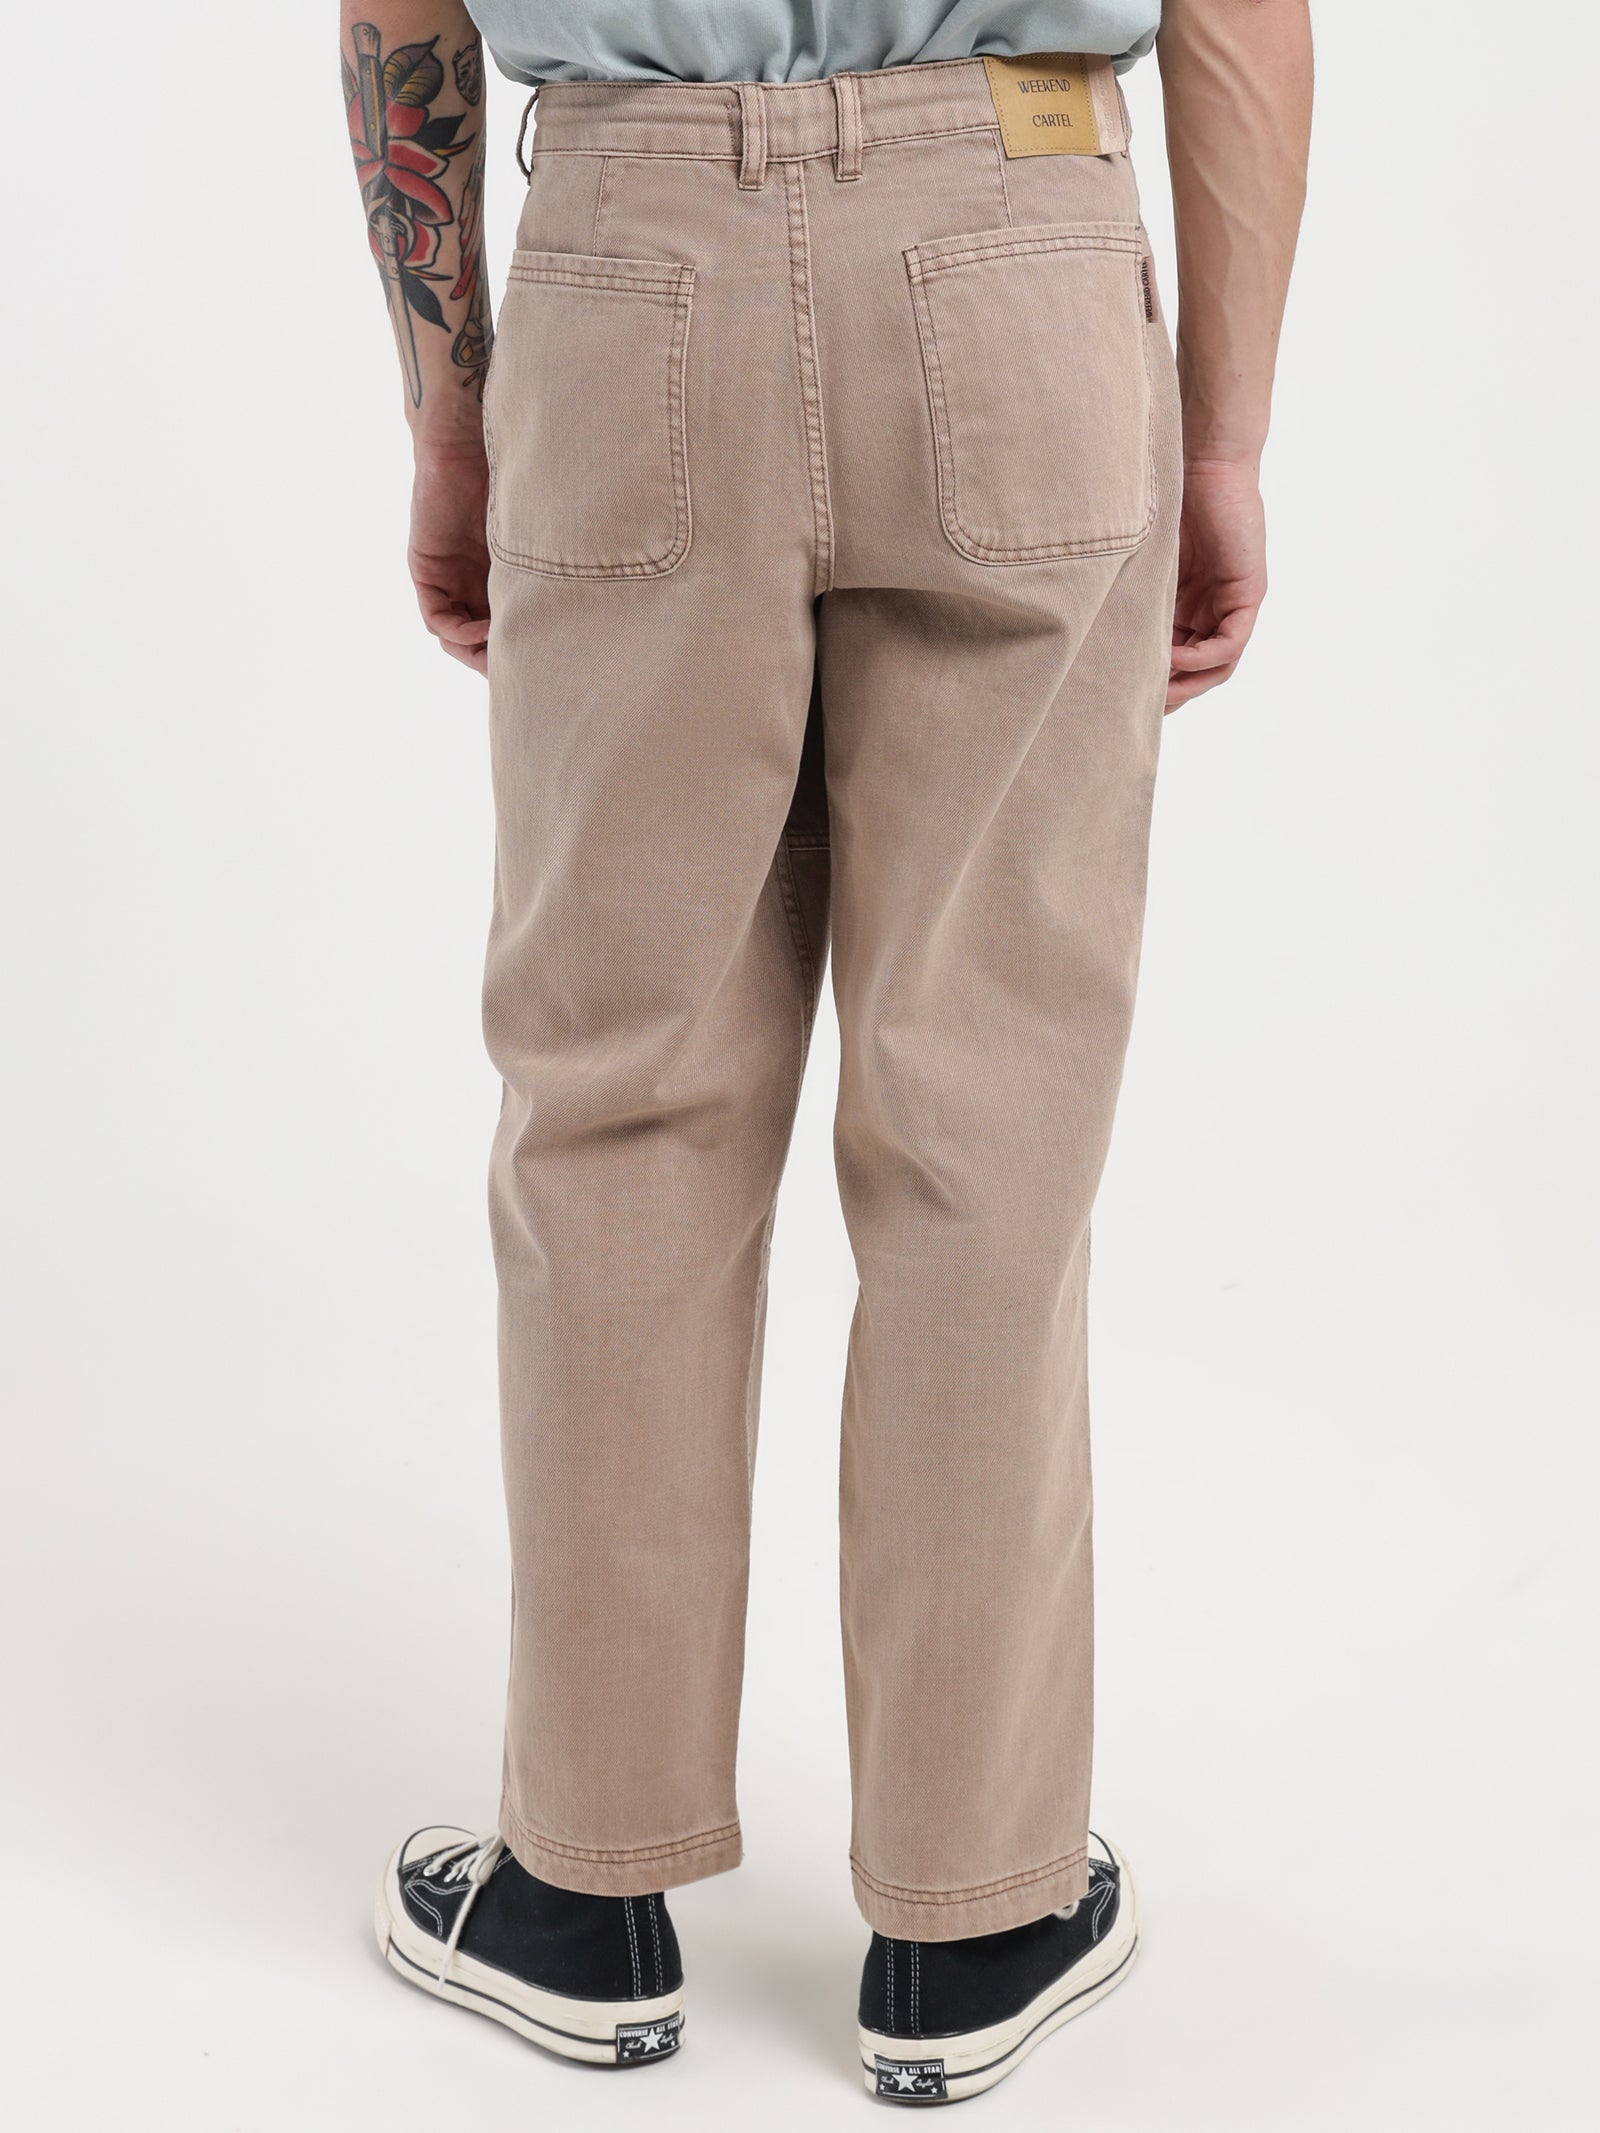 Anarchy Relaxed Jeans in Putty